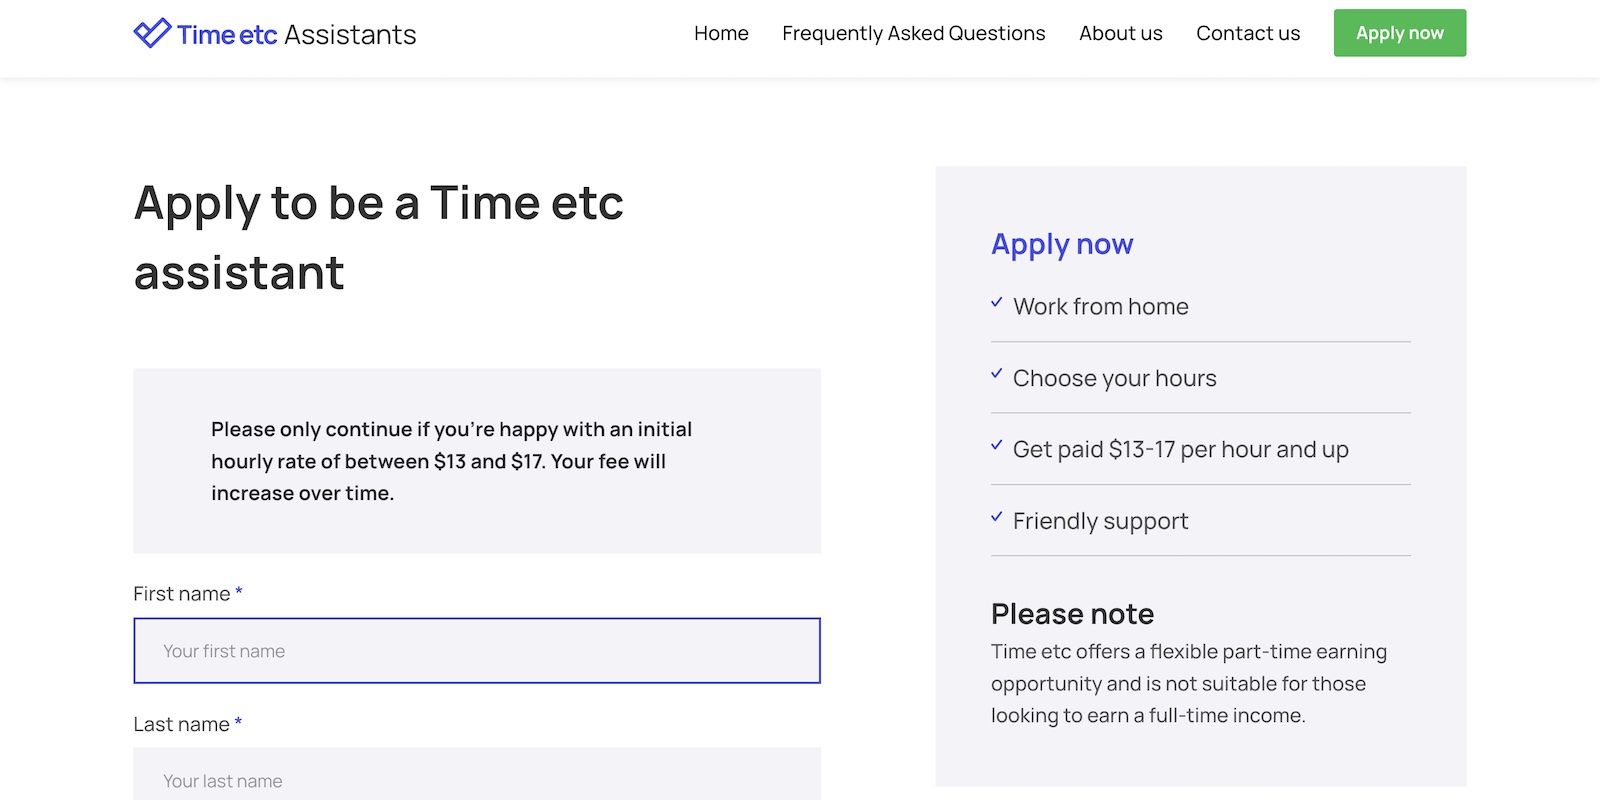 Qualifications for Applying at Time Etc Virtual Assistants